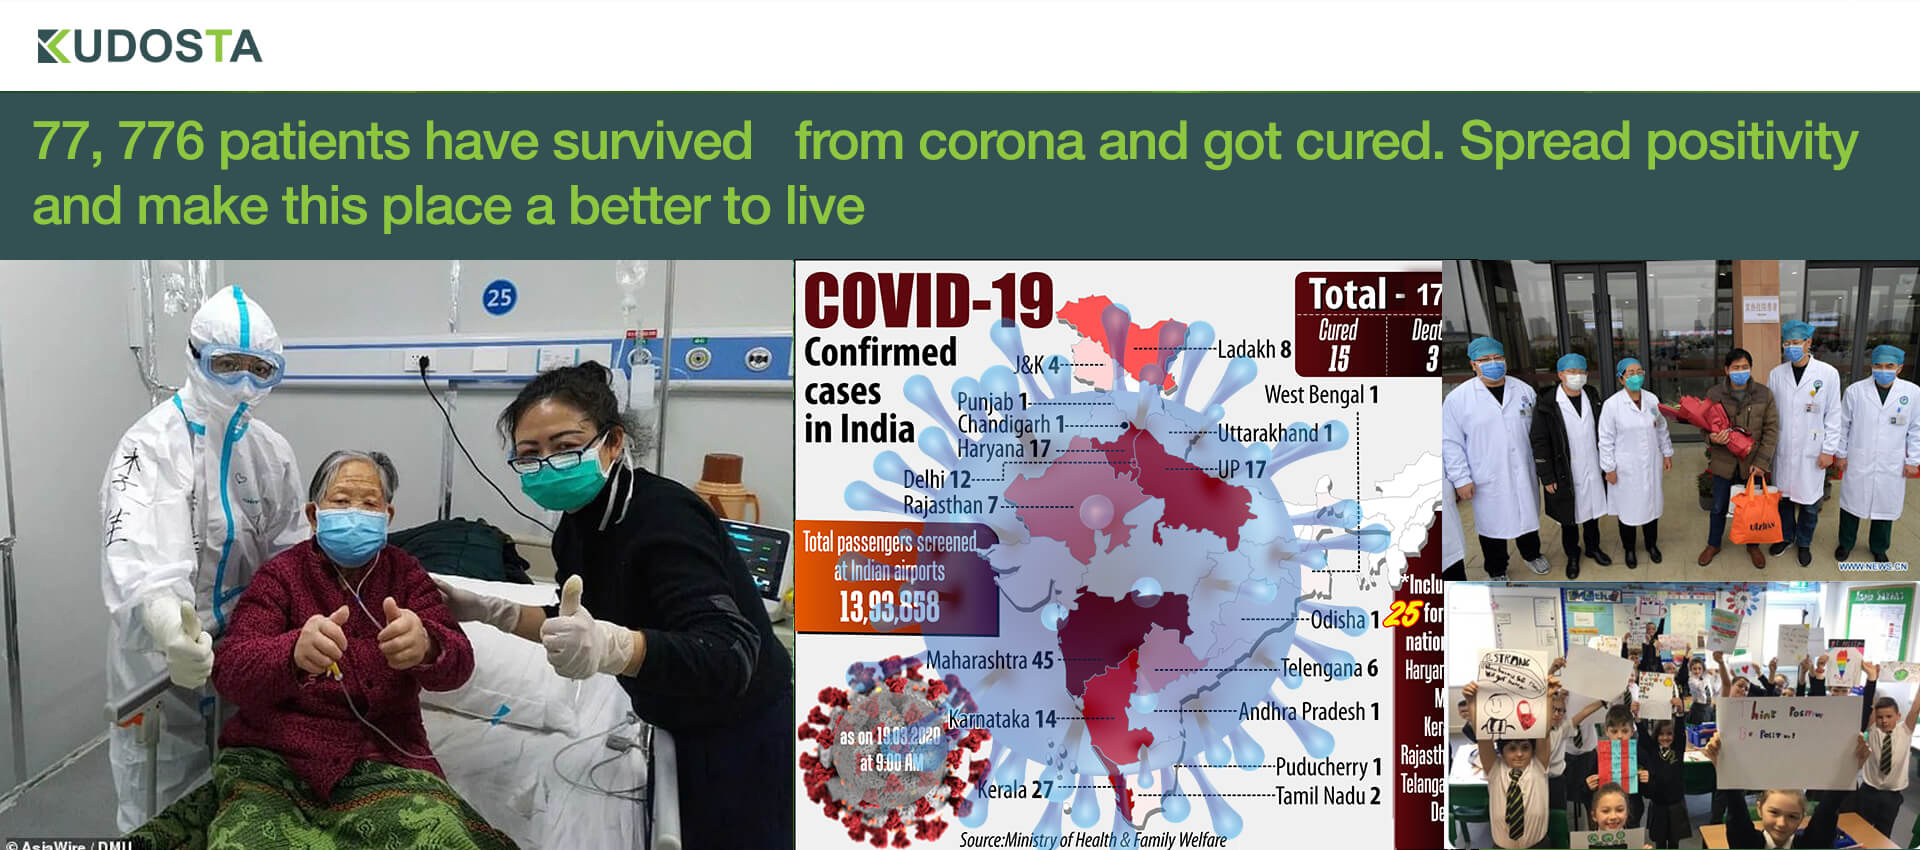 77, 776 patients have survived from corona and got cured. Spread positivity and make this place a better to live